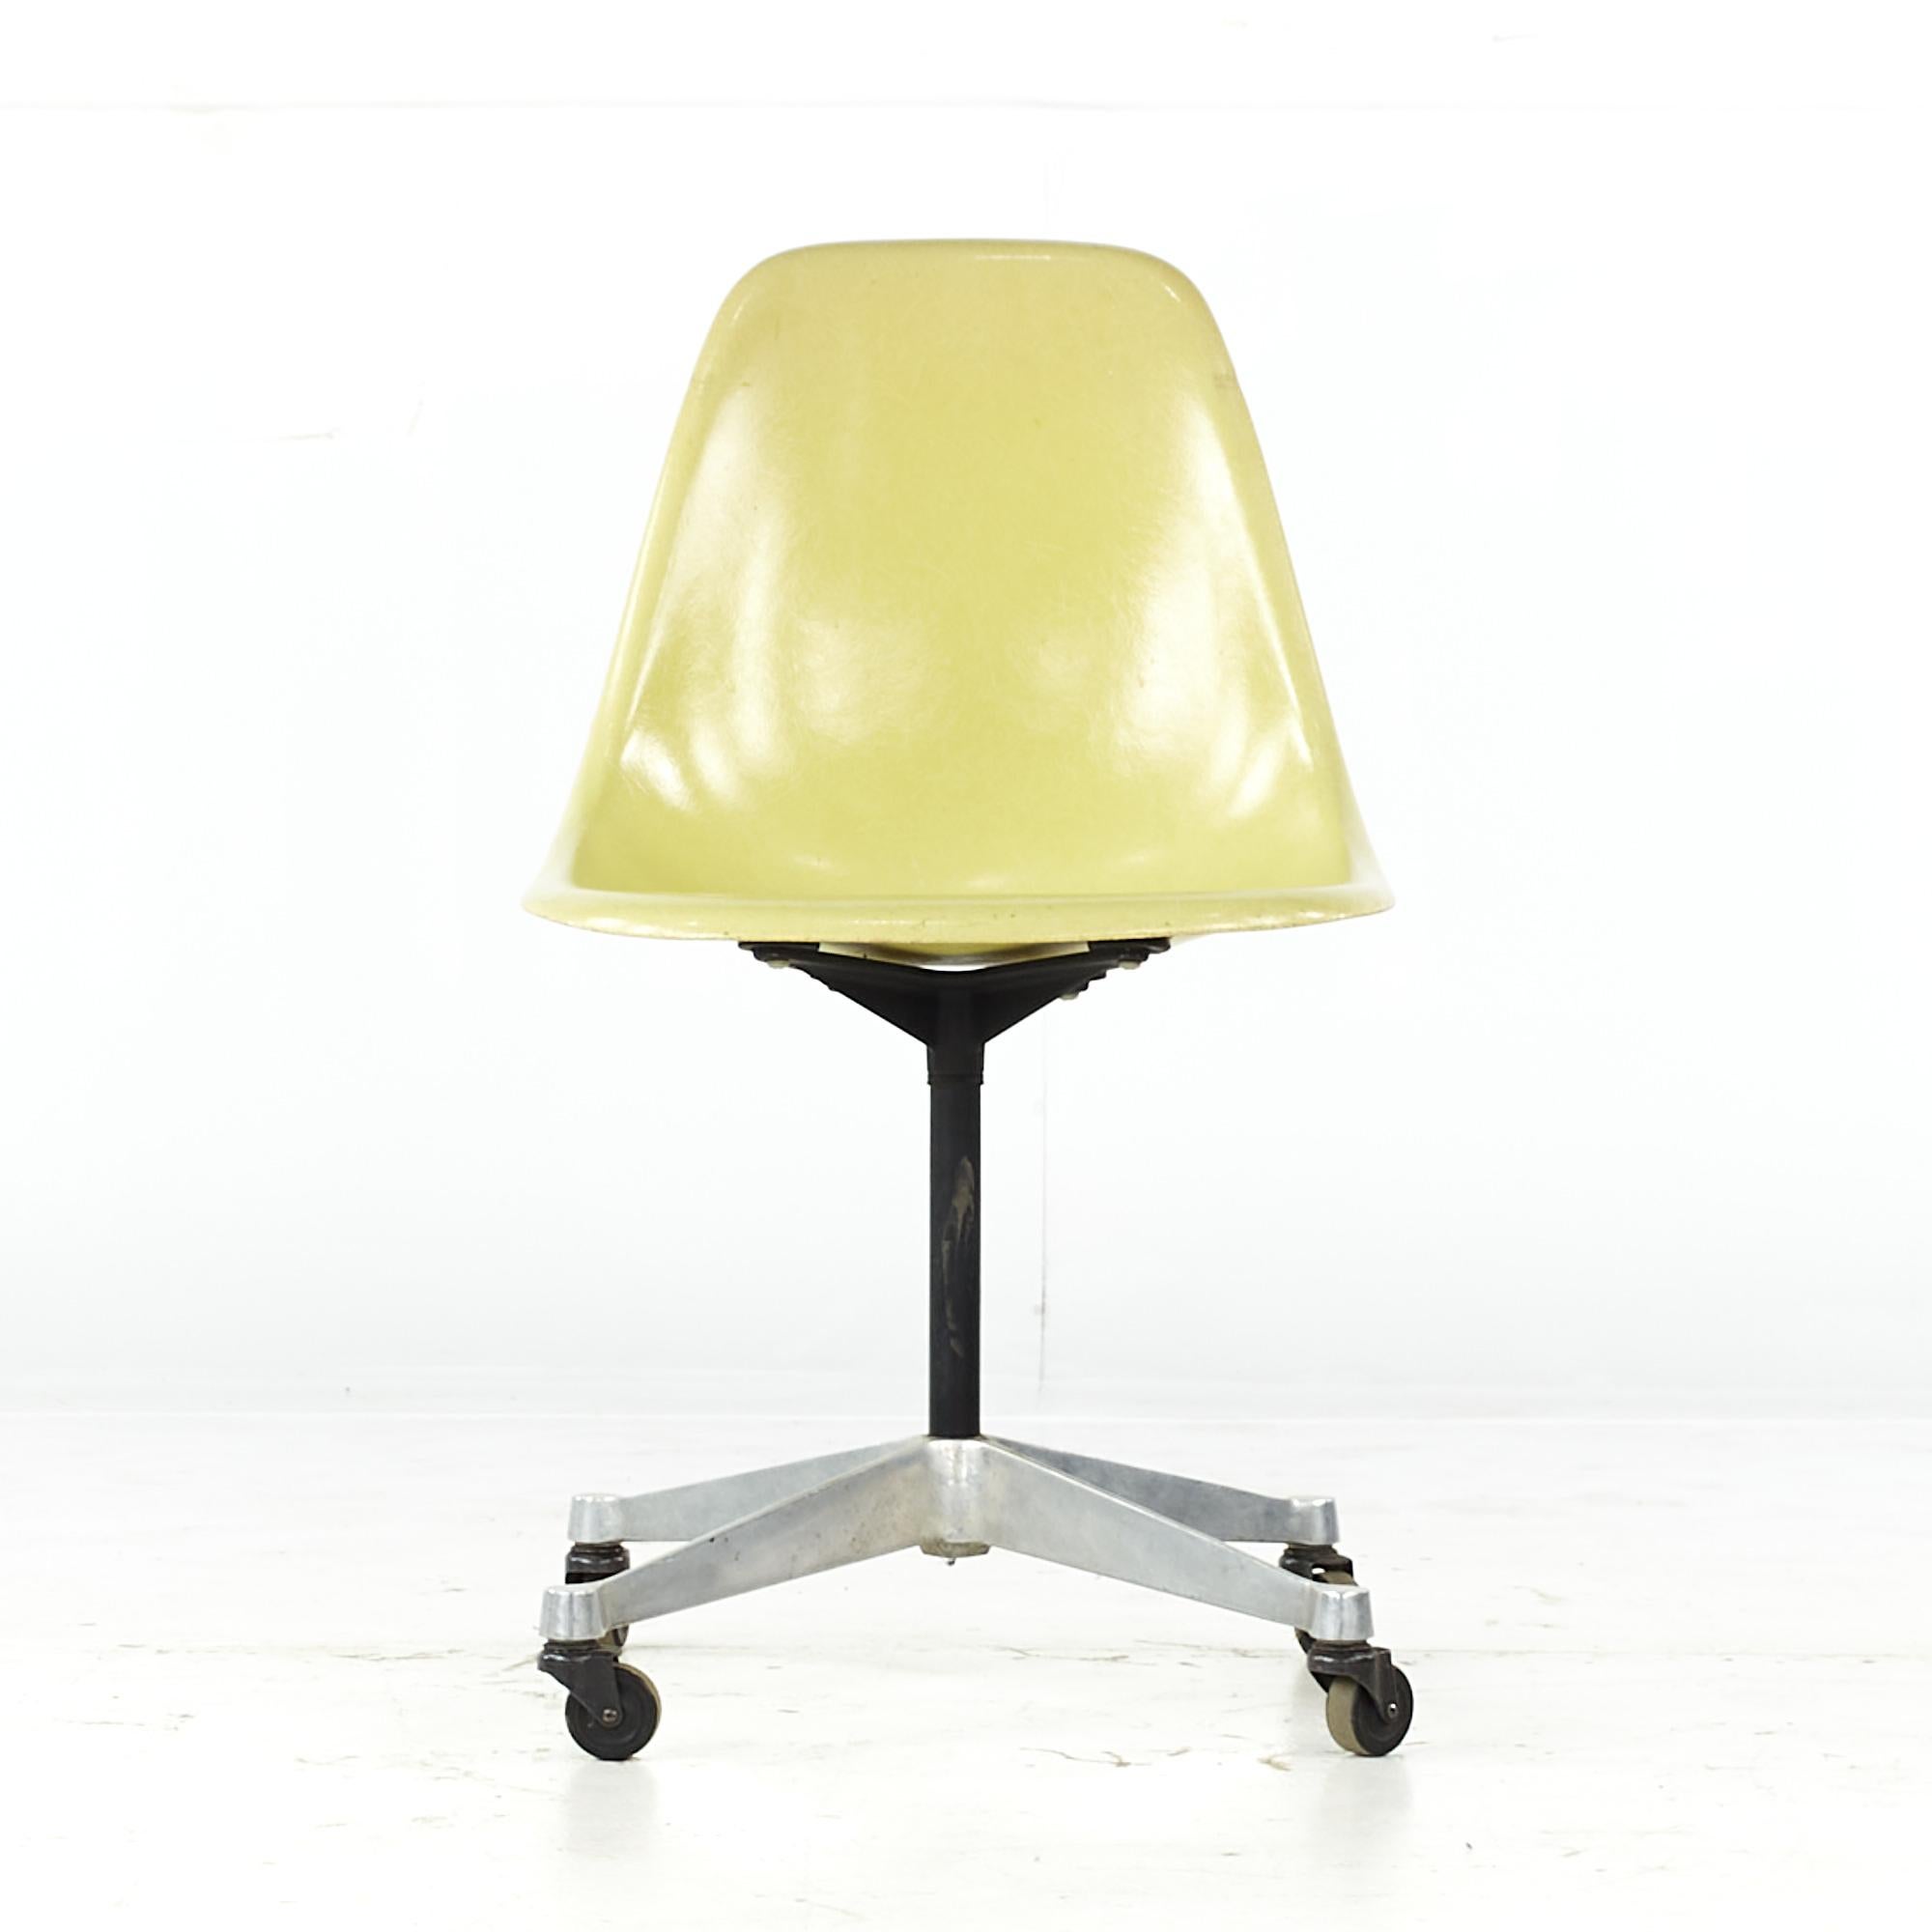 Charles and Ray Eames for Herman Miller mid-century fiberglass wheeled shell chair.

This chair measures: 18.5 wide x 24 deep x 32 high, with a seat height of 17.5 inches.

All pieces of furniture can be had in what we call restored vintage